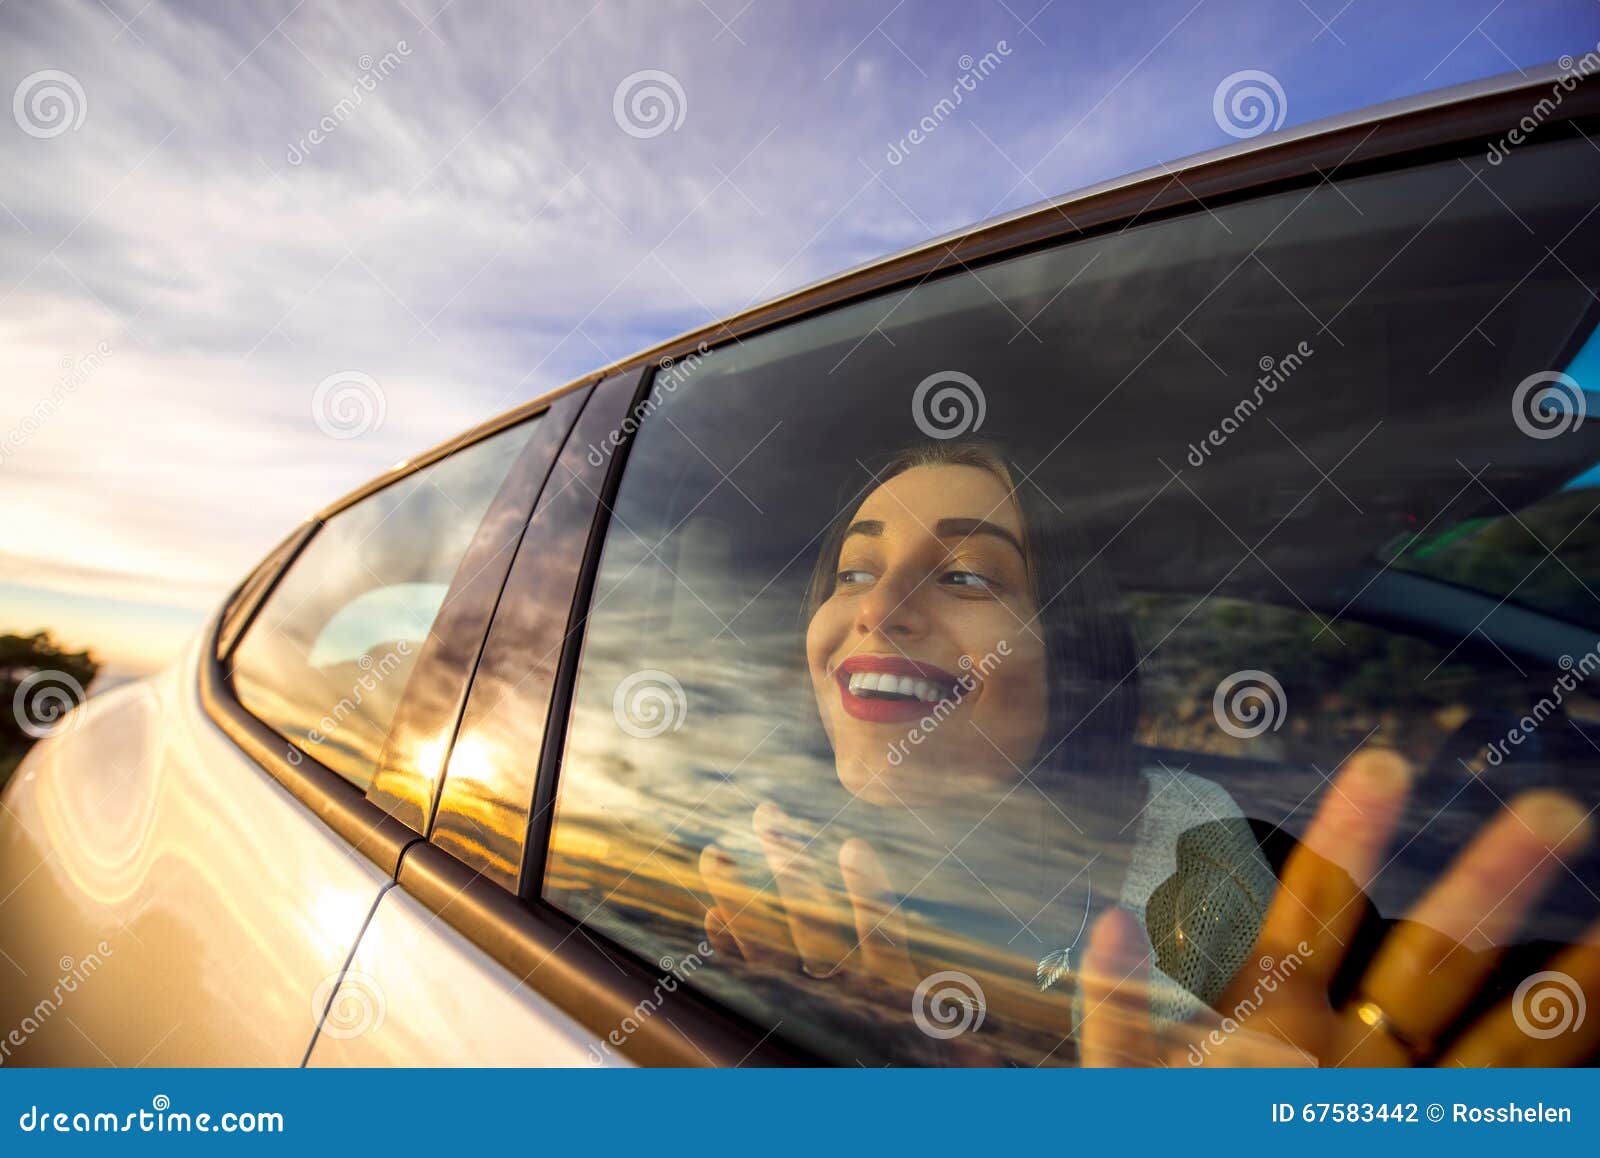 74+ Thousand Car Window Reflection Royalty-Free Images, Stock Photos &  Pictures